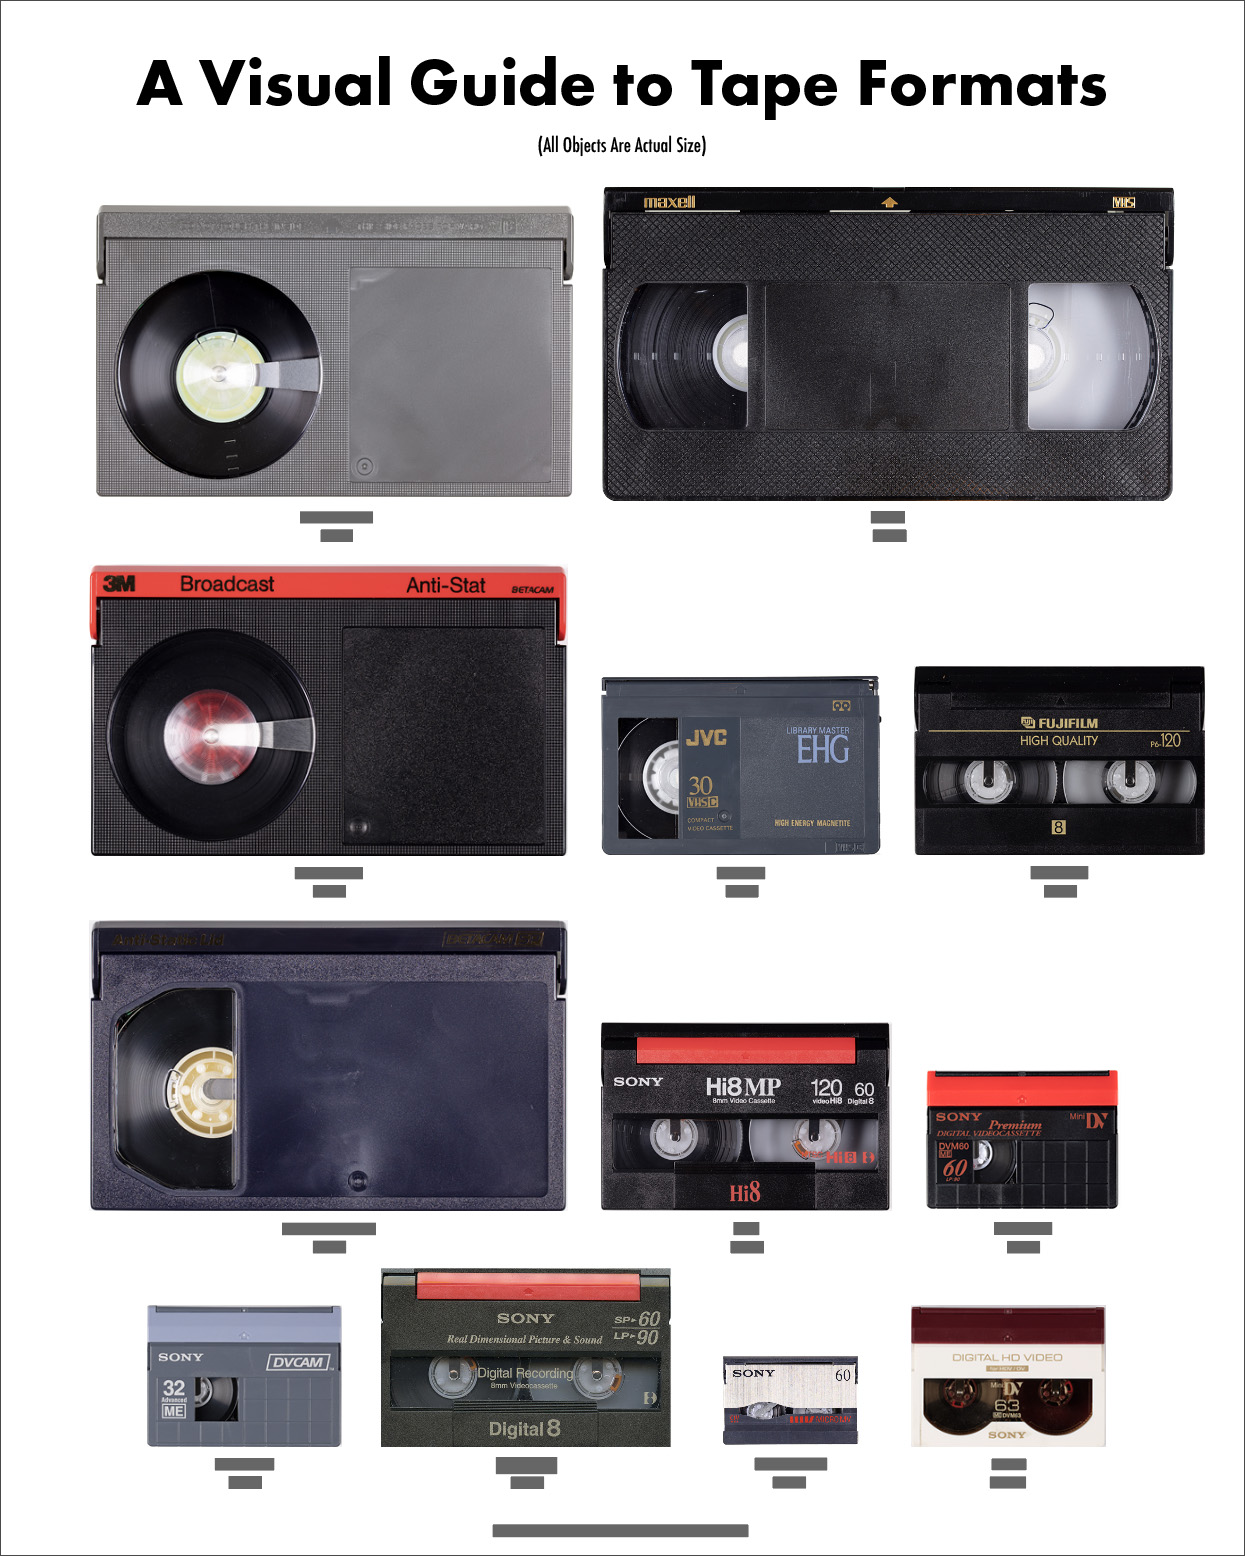 Visual Guide to Tape Formats